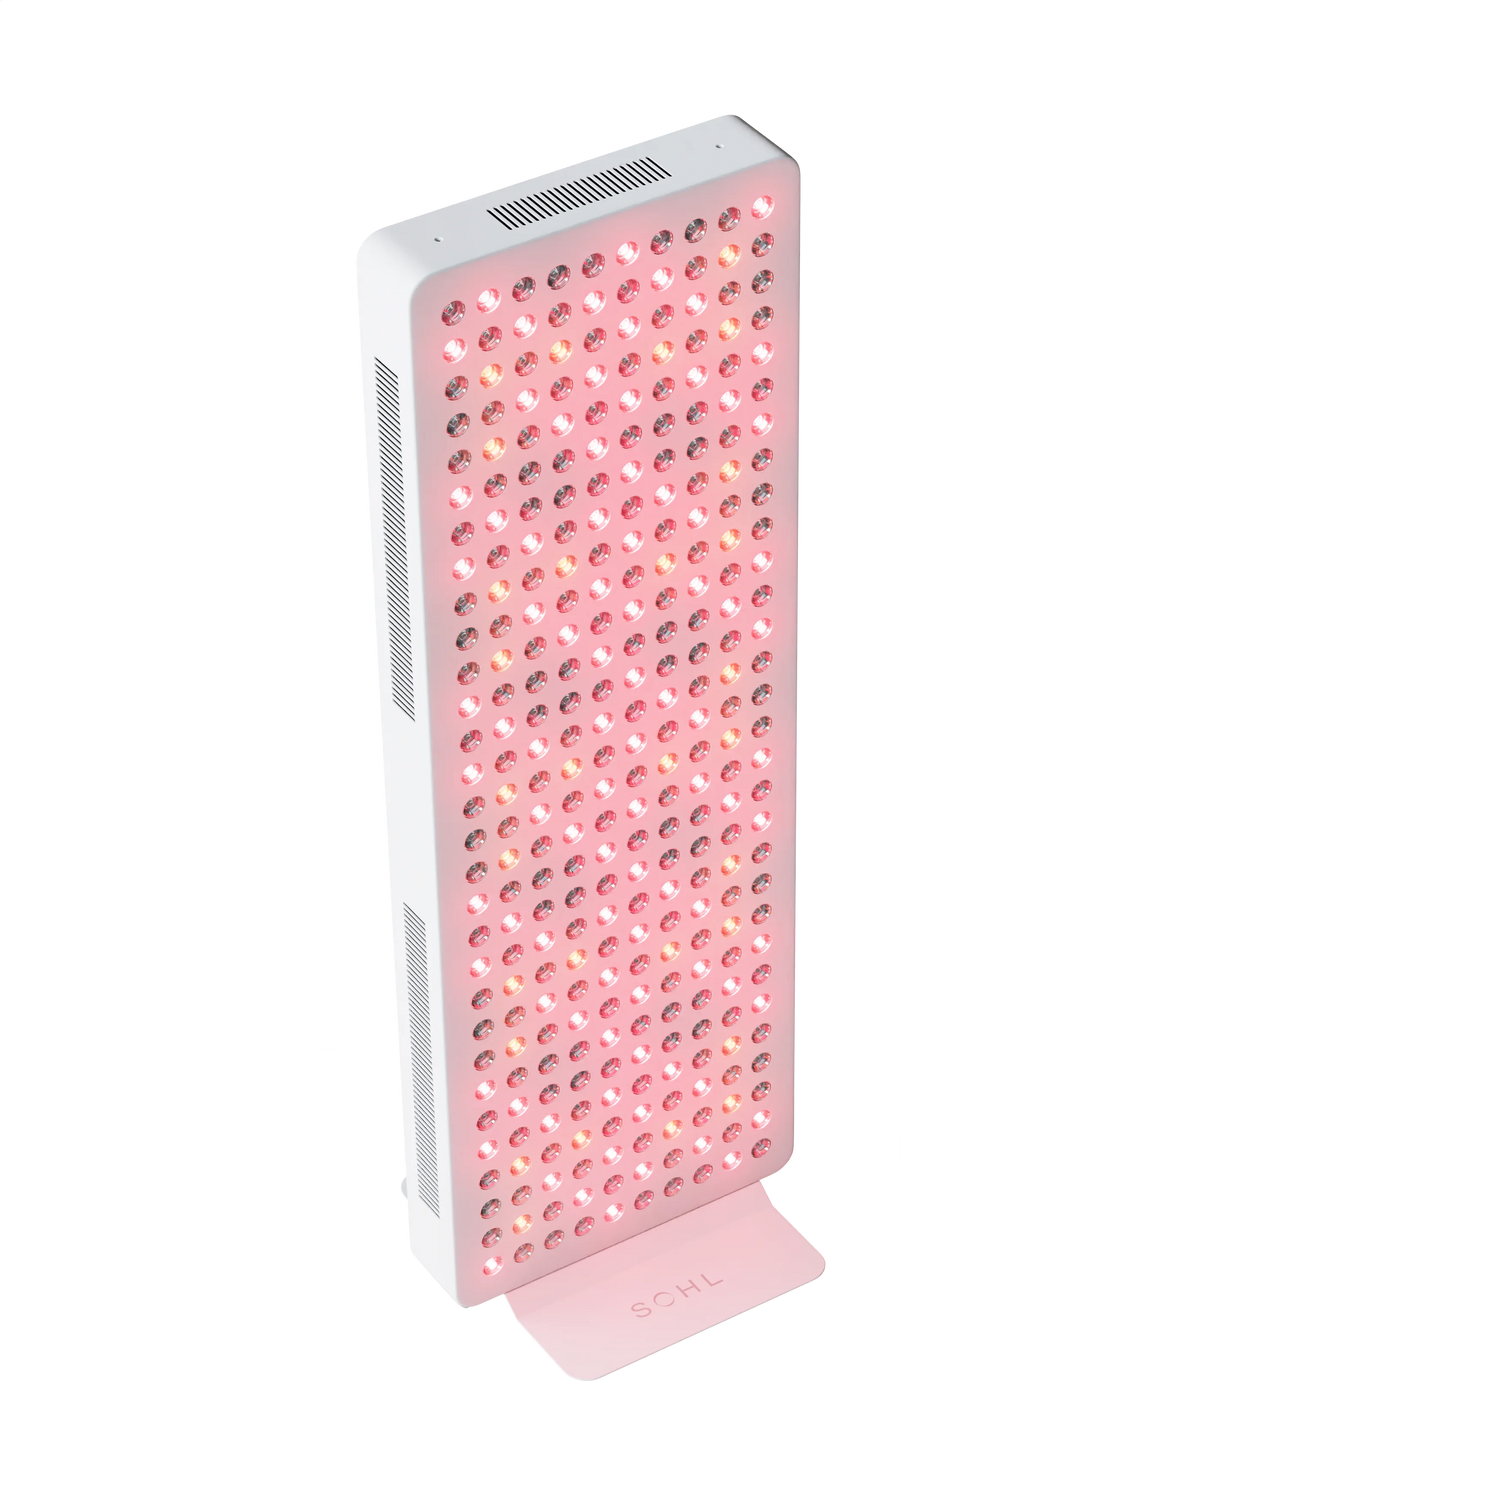 SOHL HALF Red Light Therapy Panel